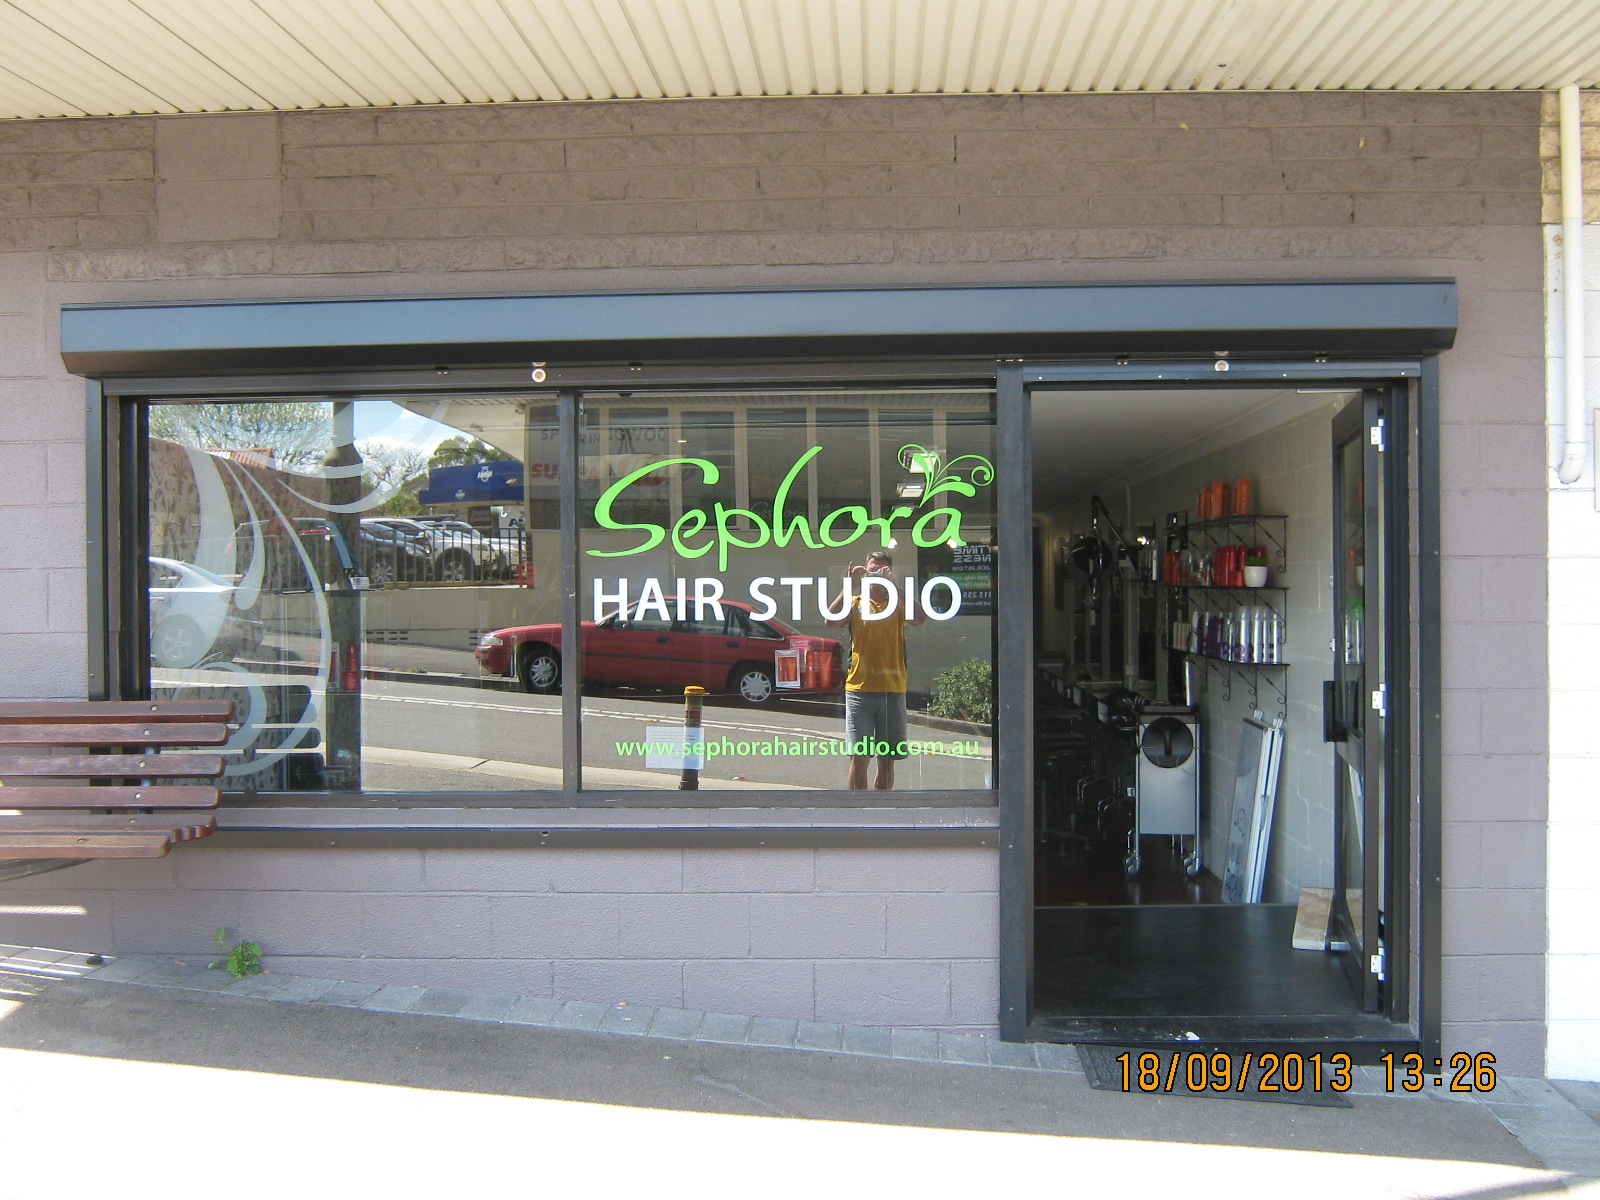 Commercial Project - Hair Studio with shutters open